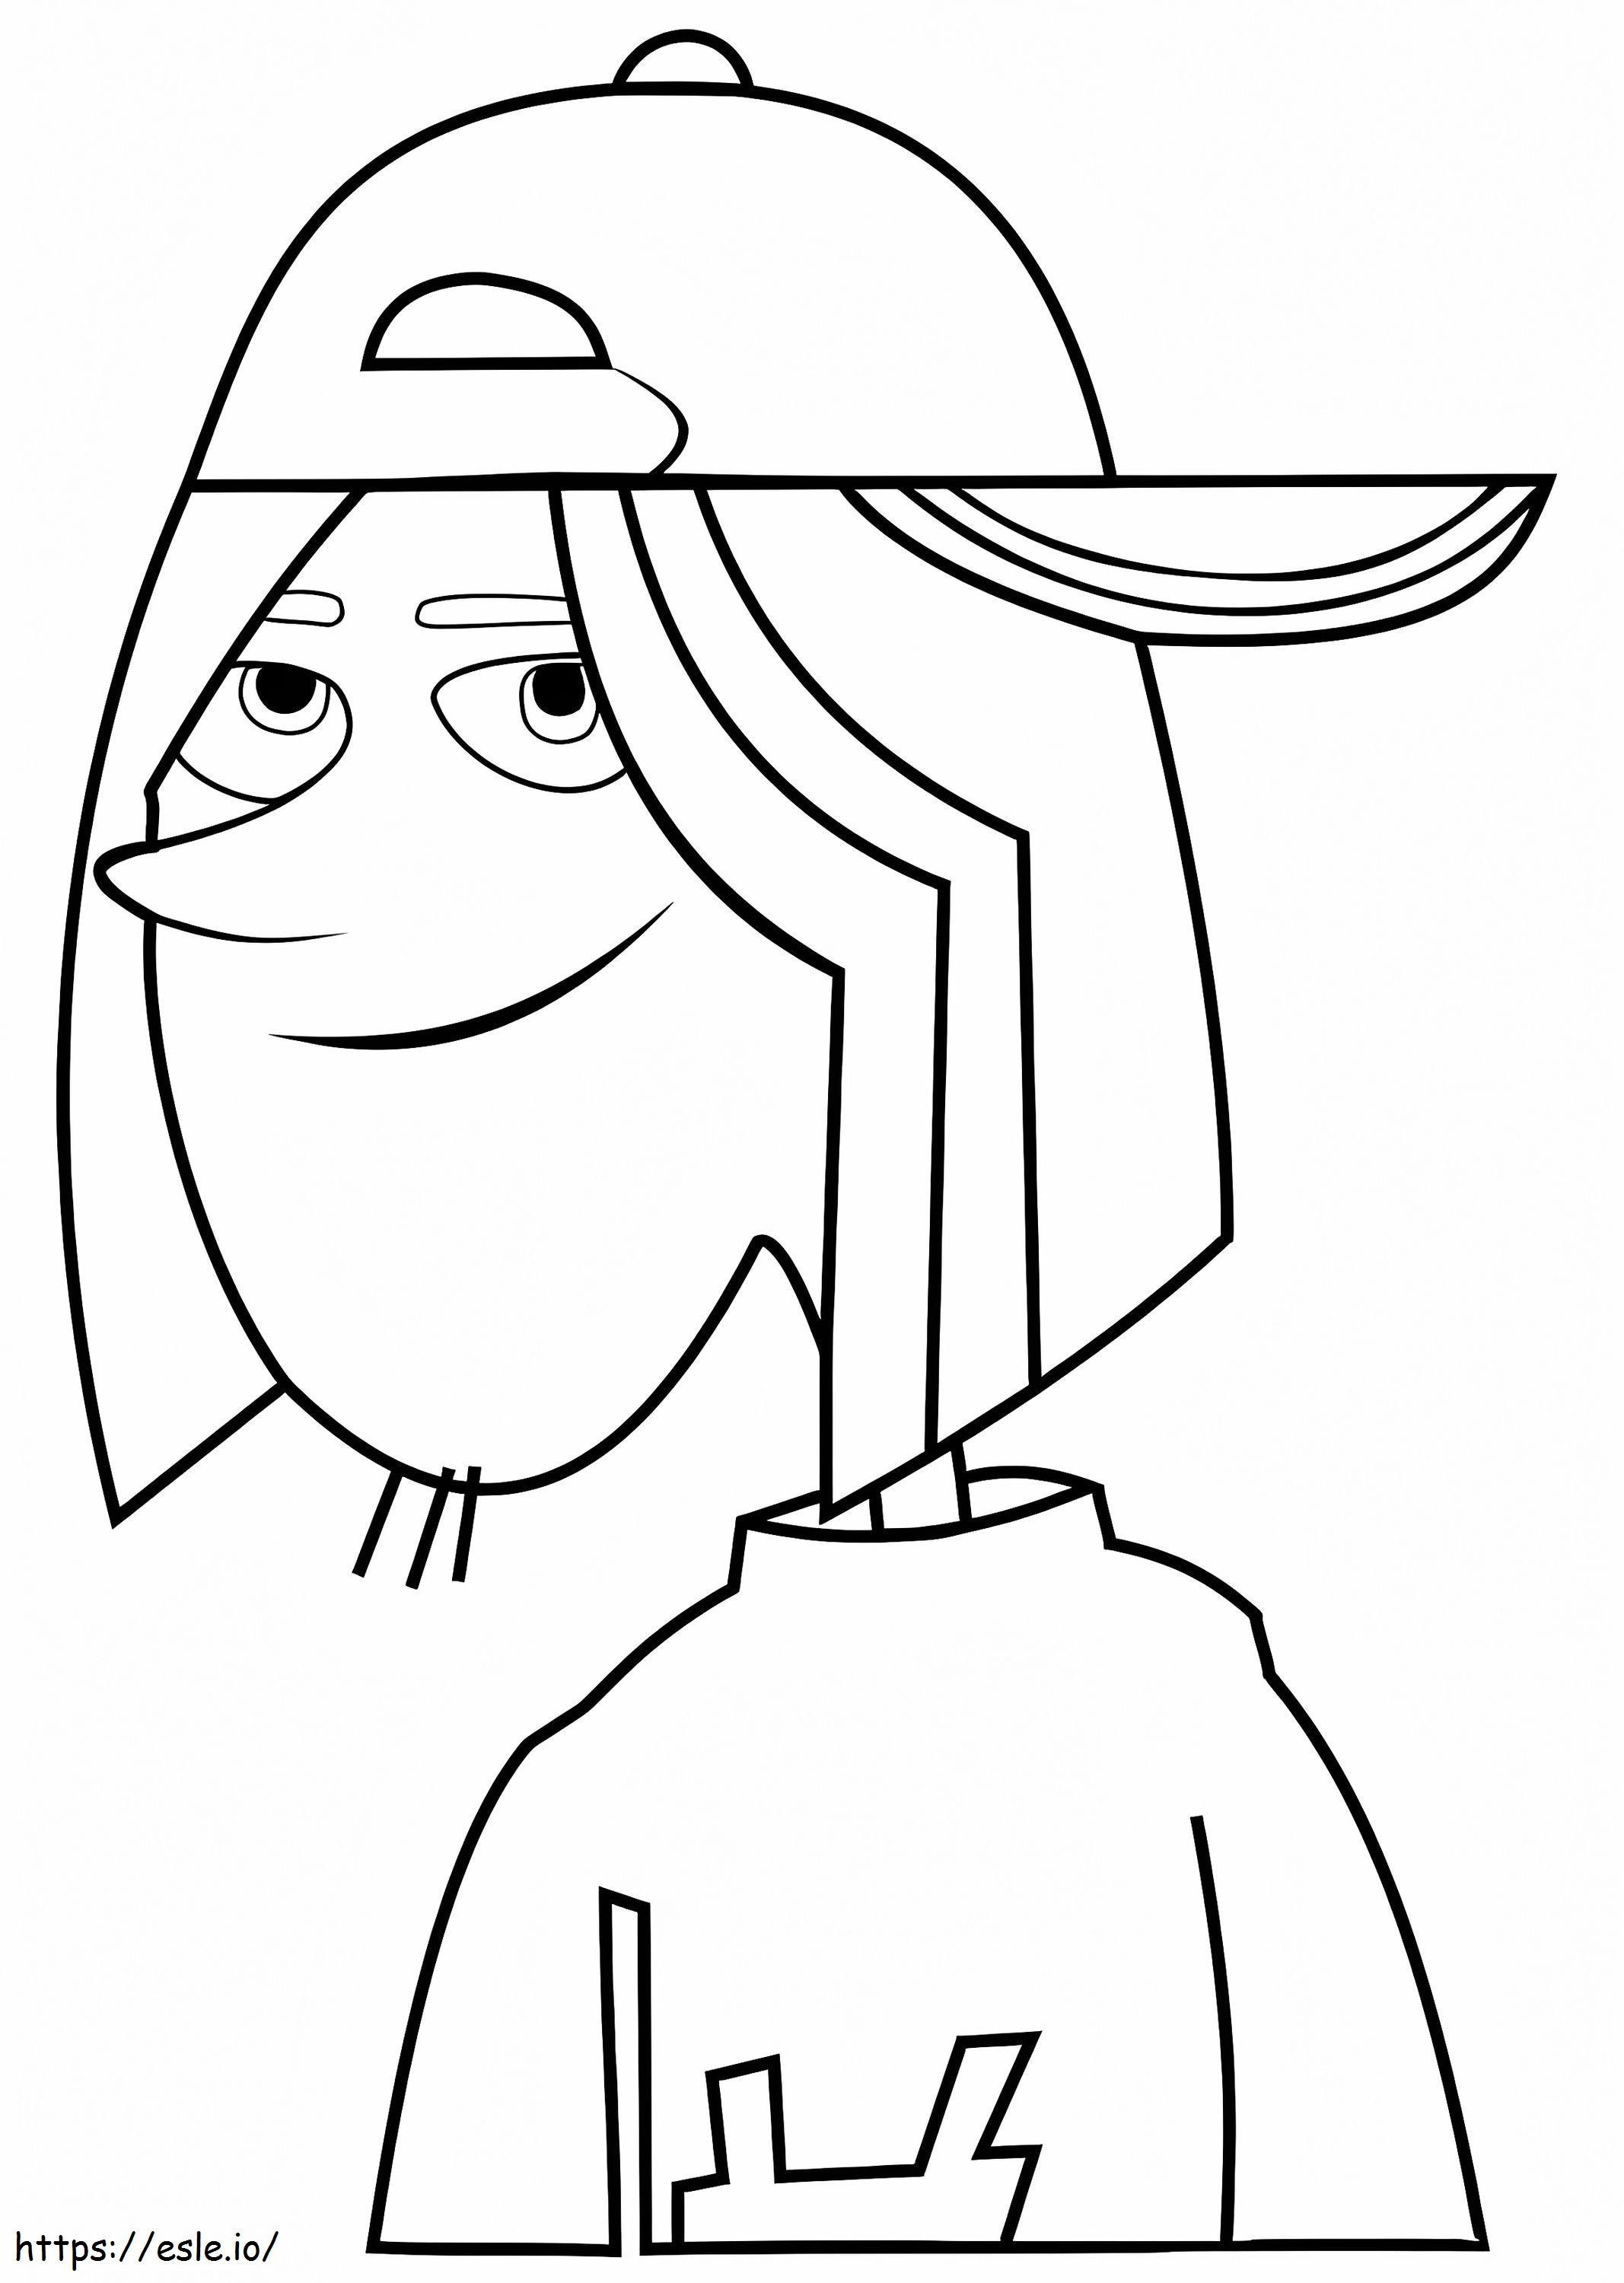 Jimmy Z From Wild Kratts coloring page